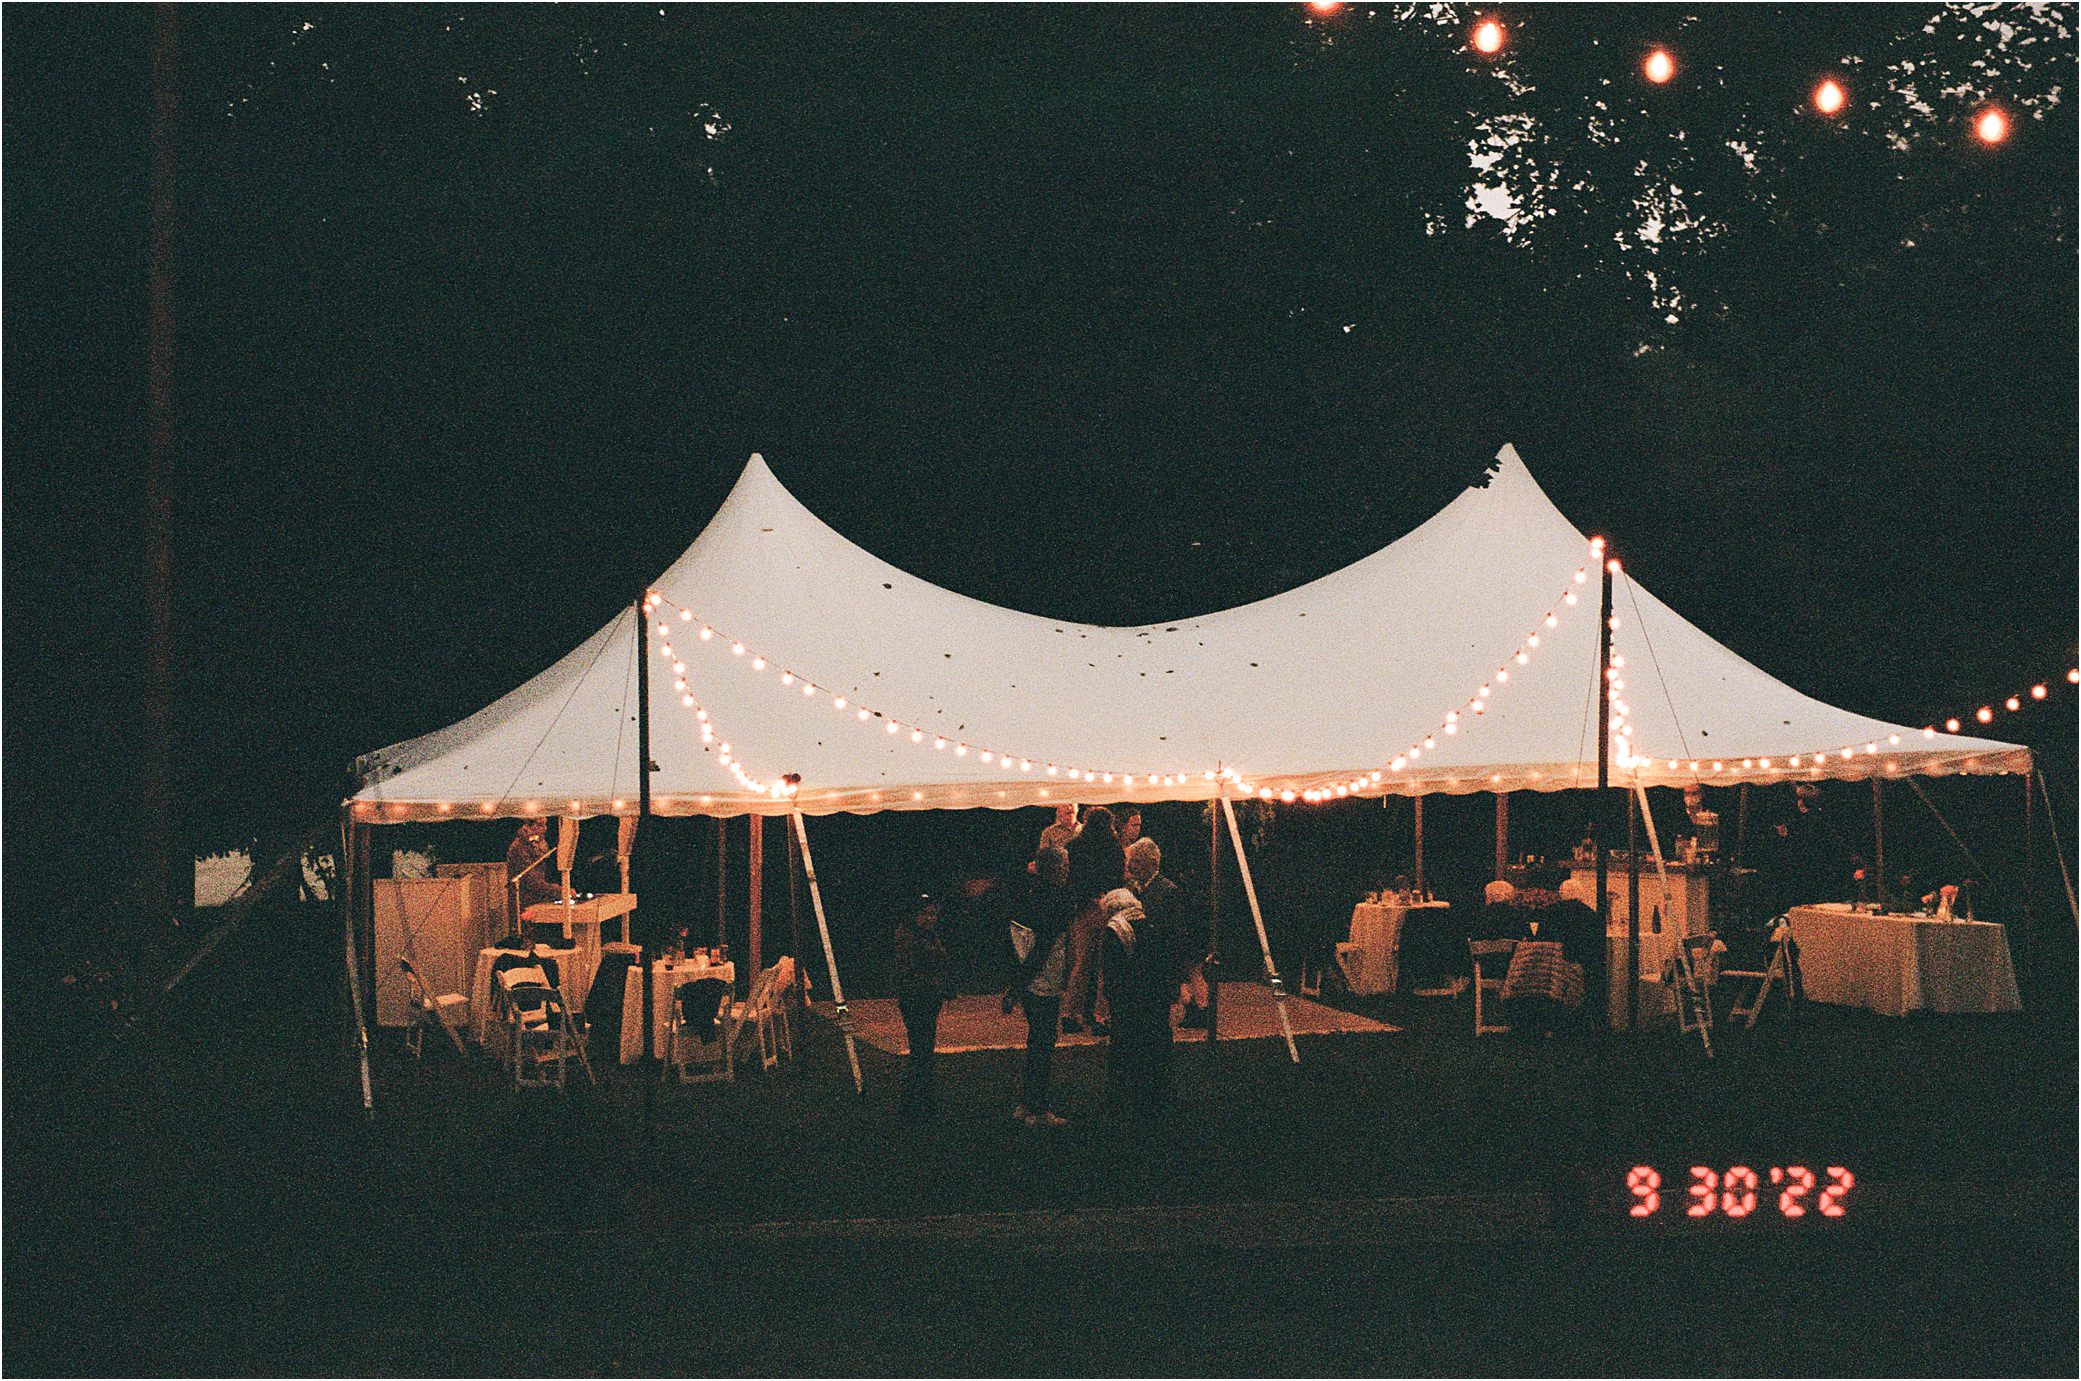 A wedding photo on film shows the end of a New England wedding reception.